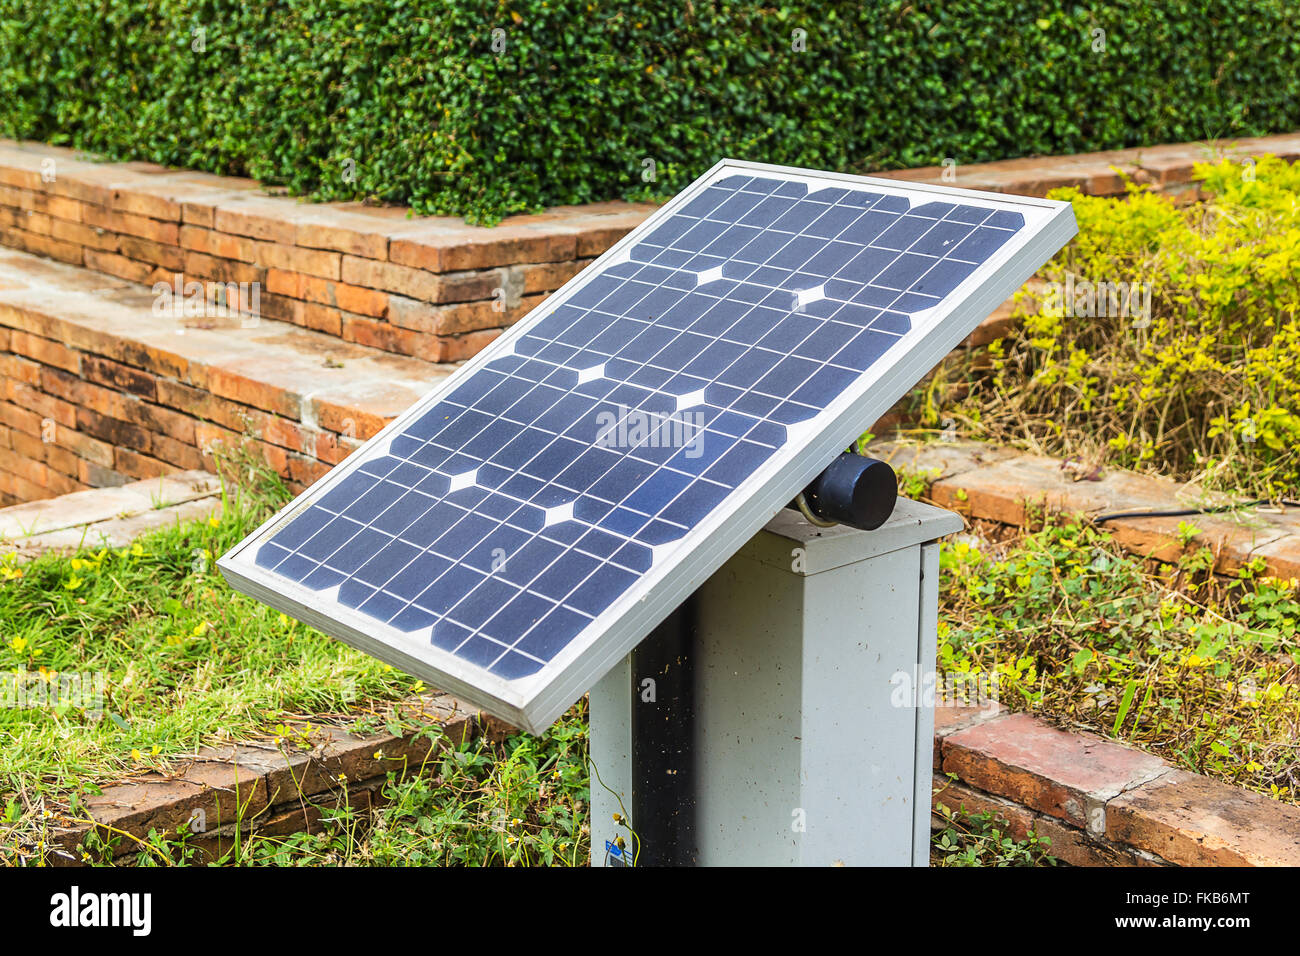 Mini stand electric solar cell in a garden. Stock Photo